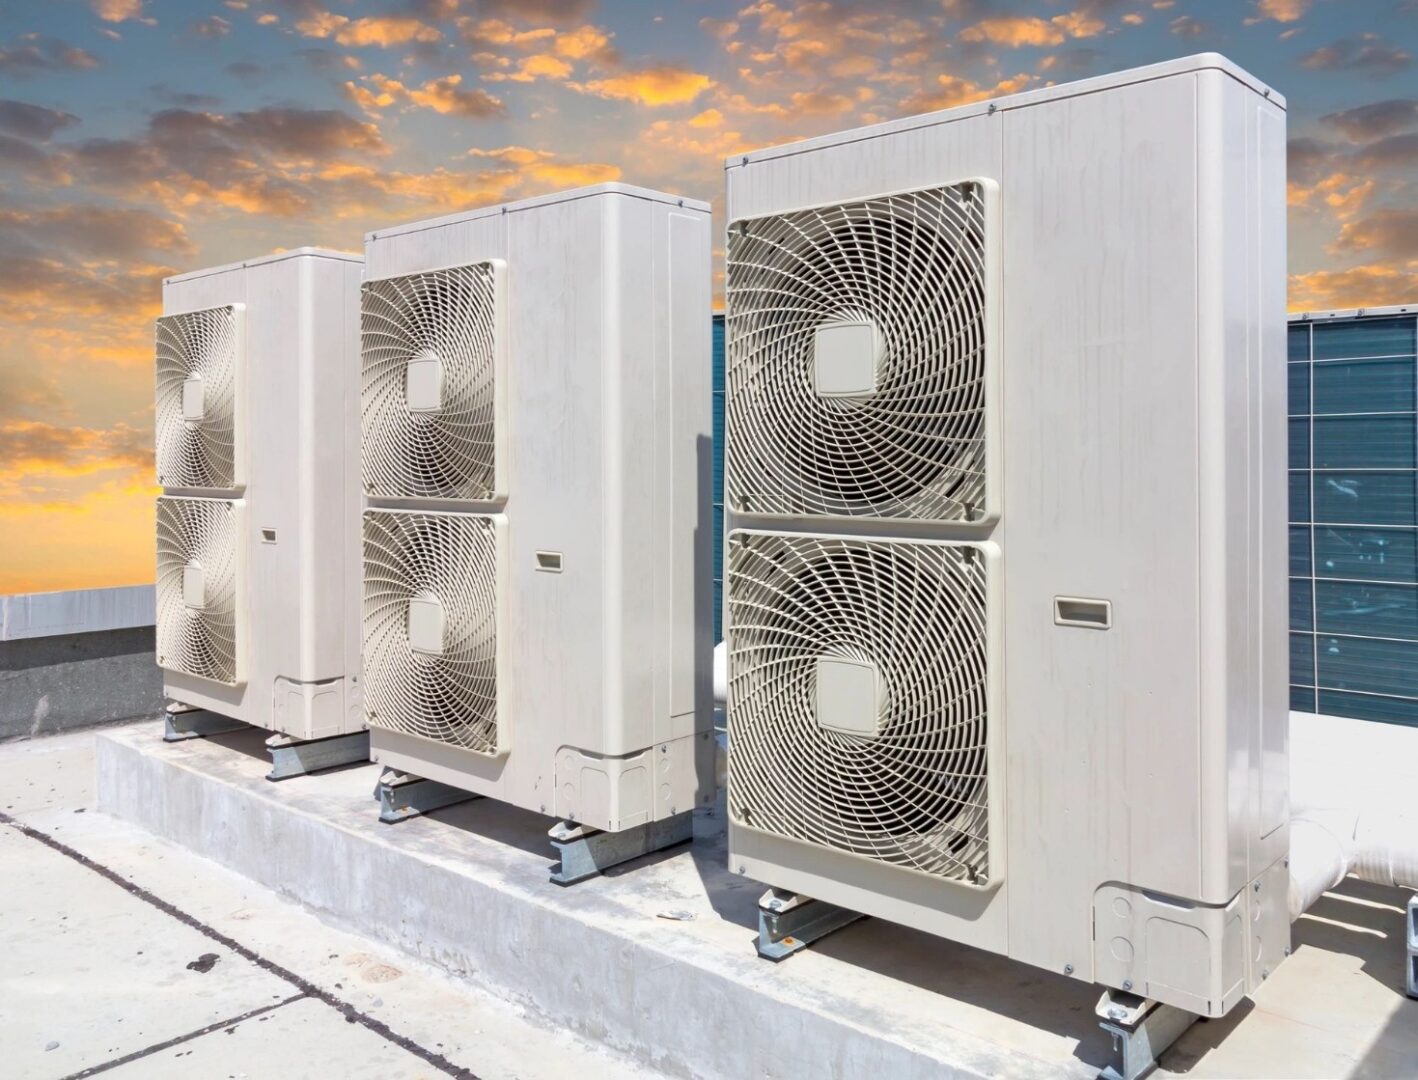 Air conditioning of the outdoor units